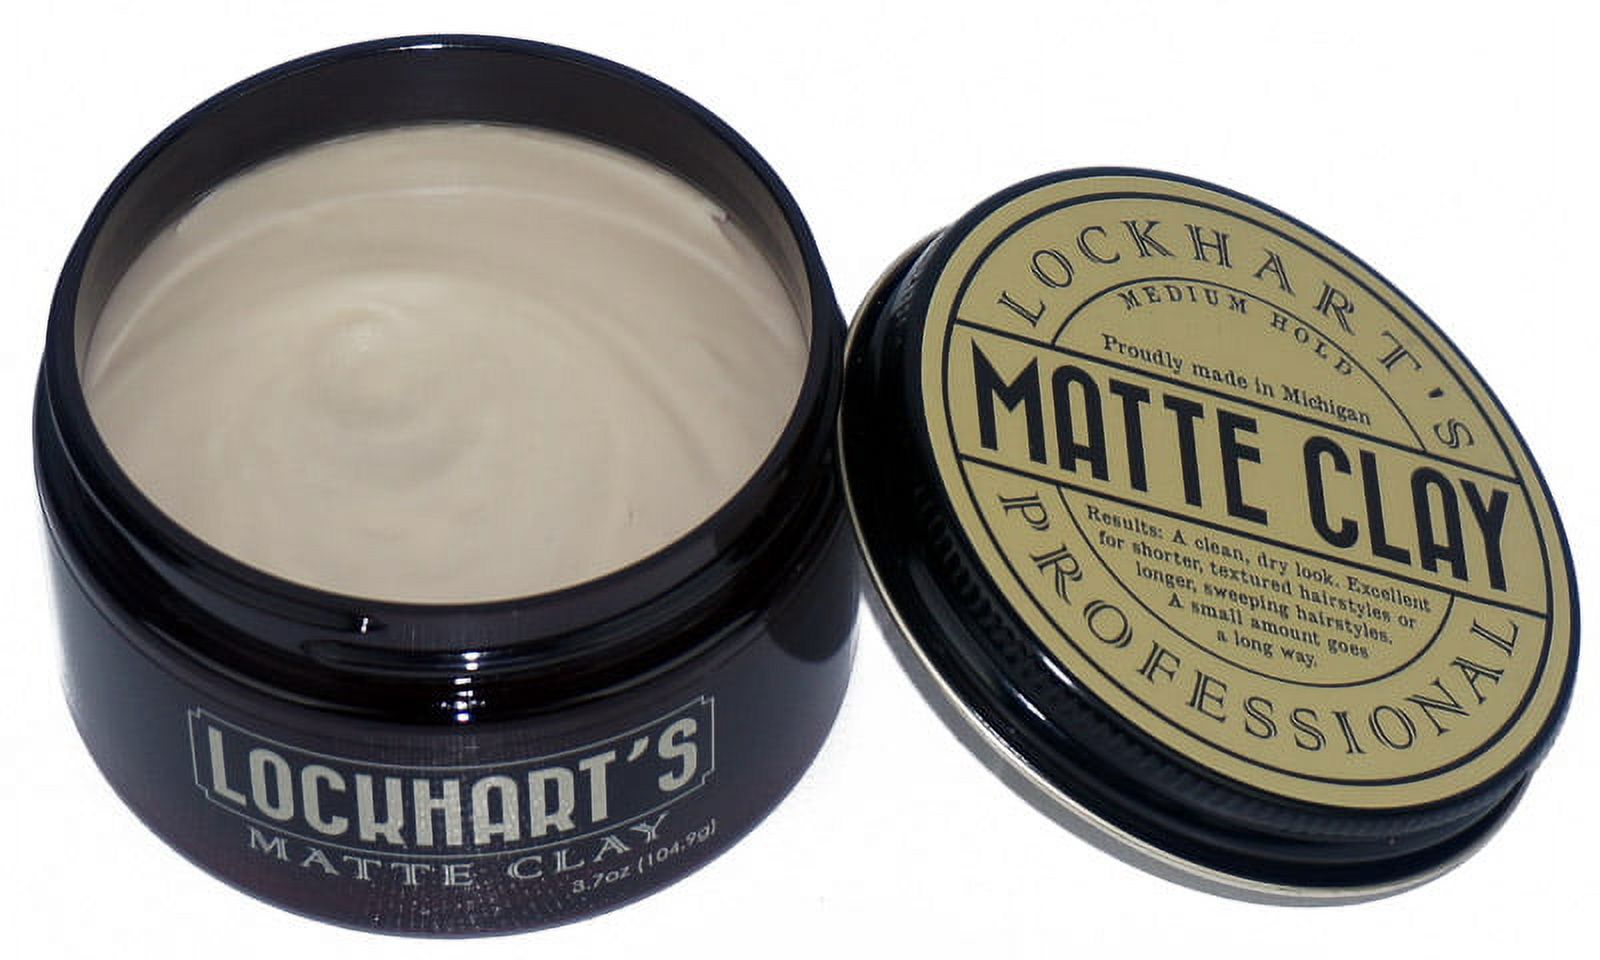 LOCKHART'S Professional Matte Clay Hair Pomade 3.7 oz - image 1 of 3